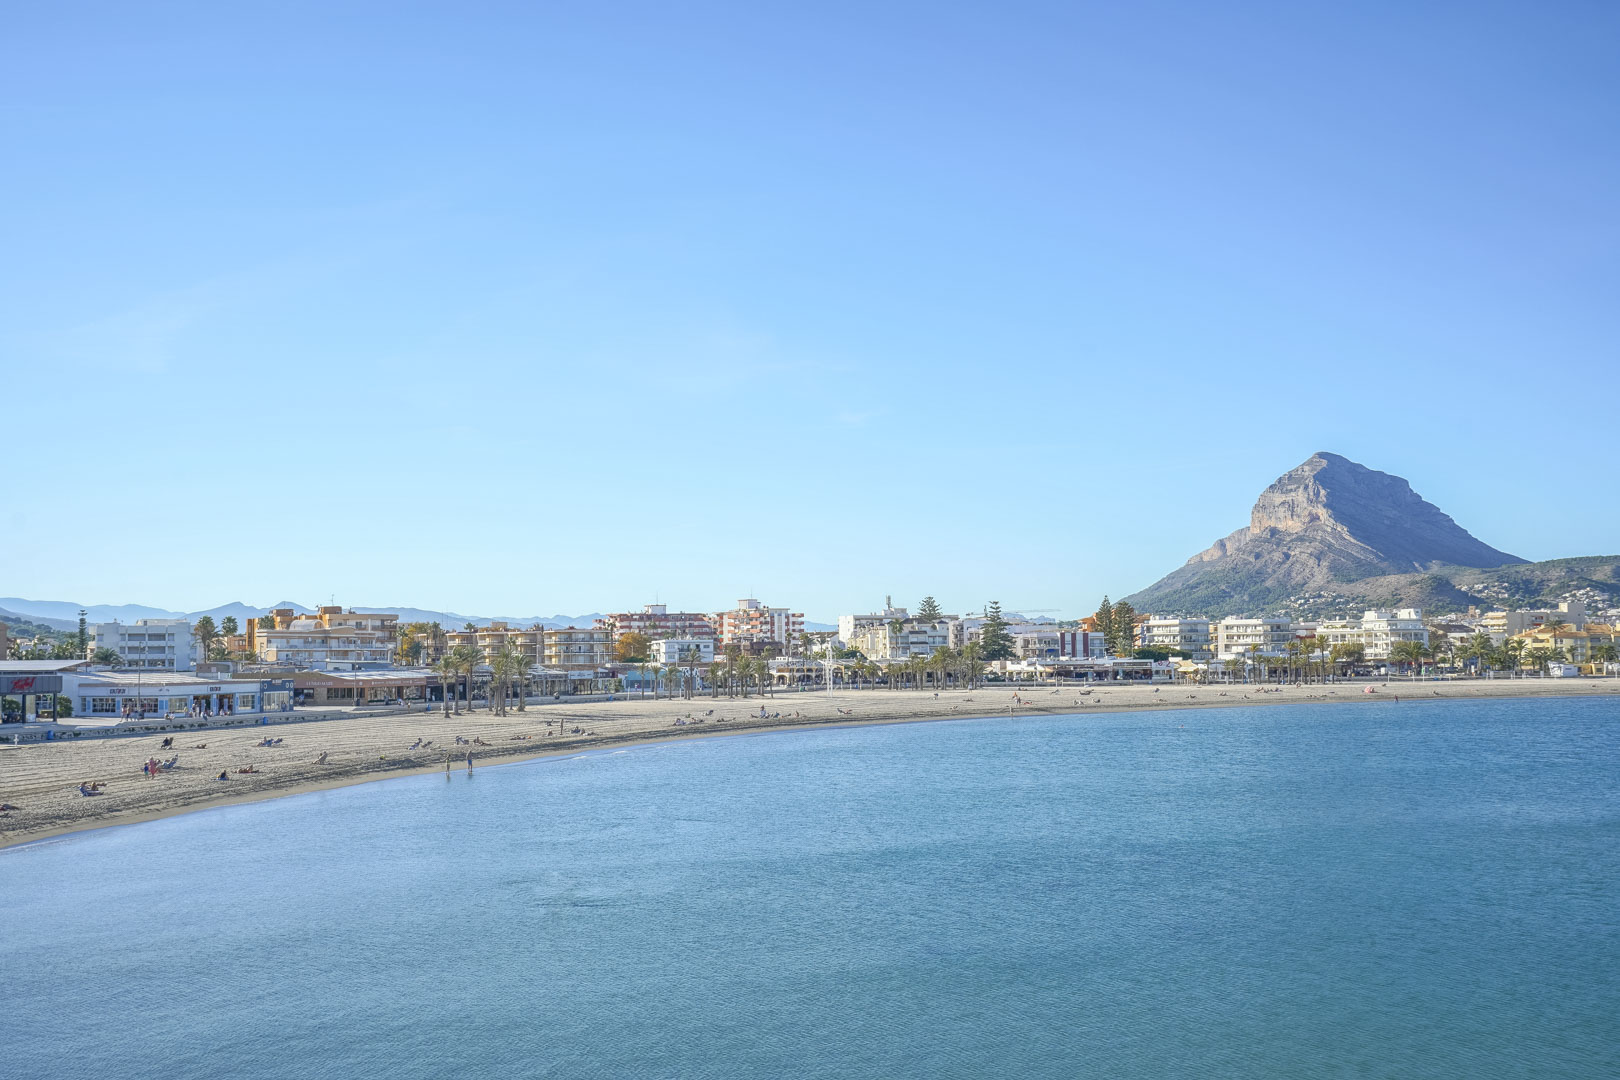 Duplex located on the ground floor for sale in Javea a few meters from Cala Blanca